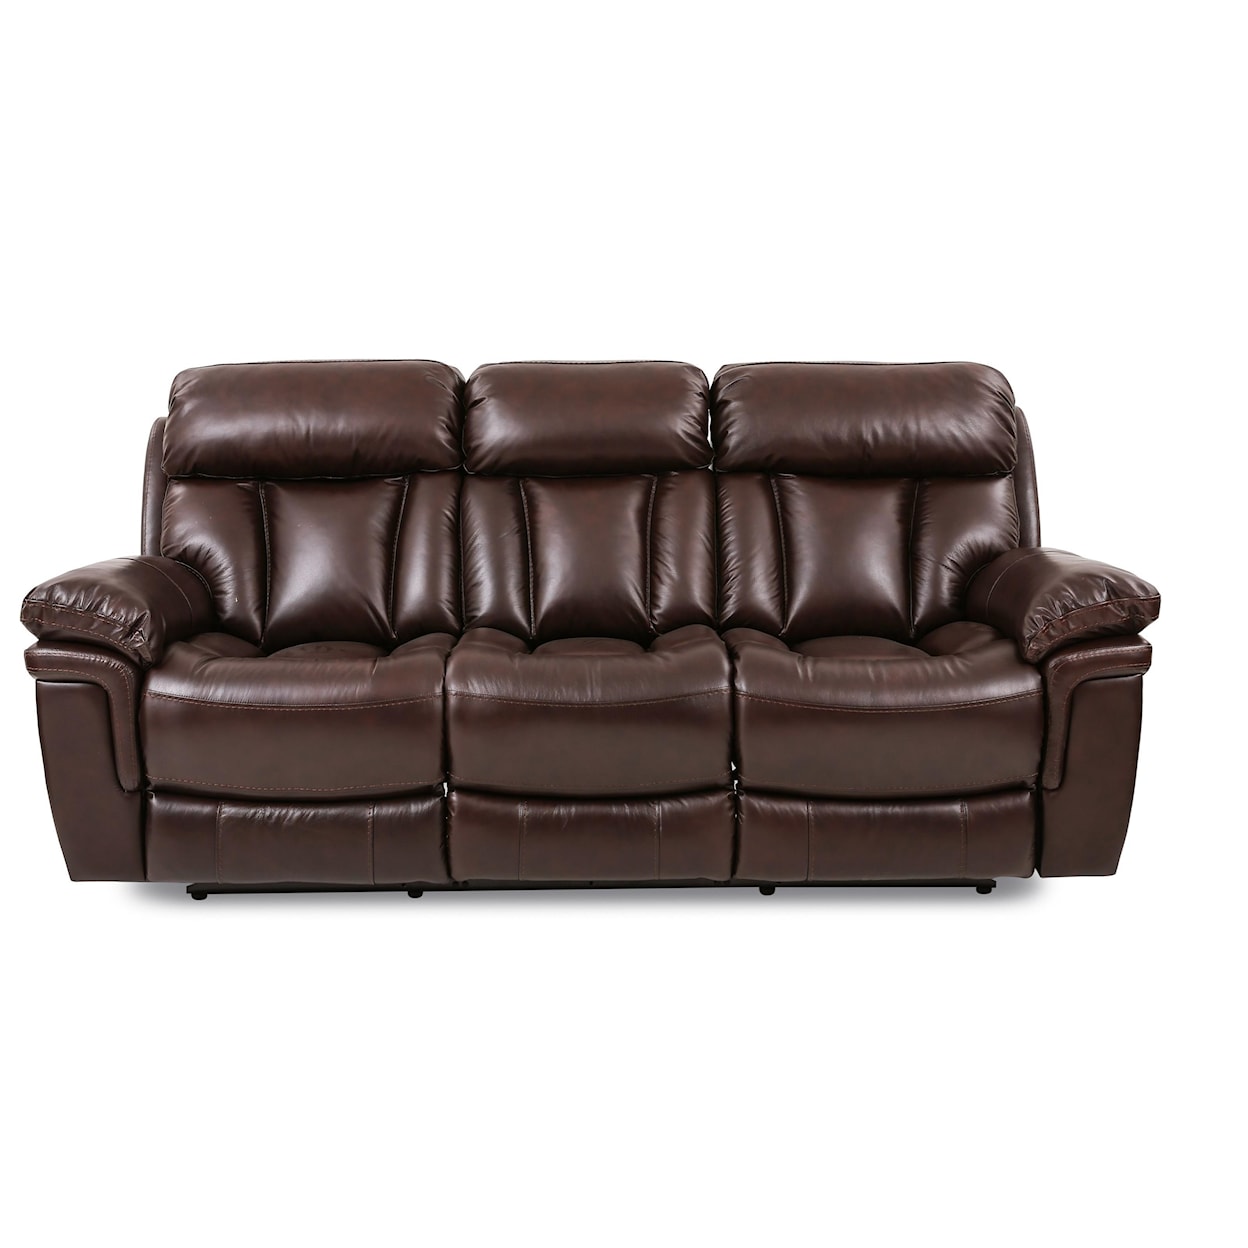 Cheers Bryant Leather Pwr Reclining Sofa w/ Pwr Headrests